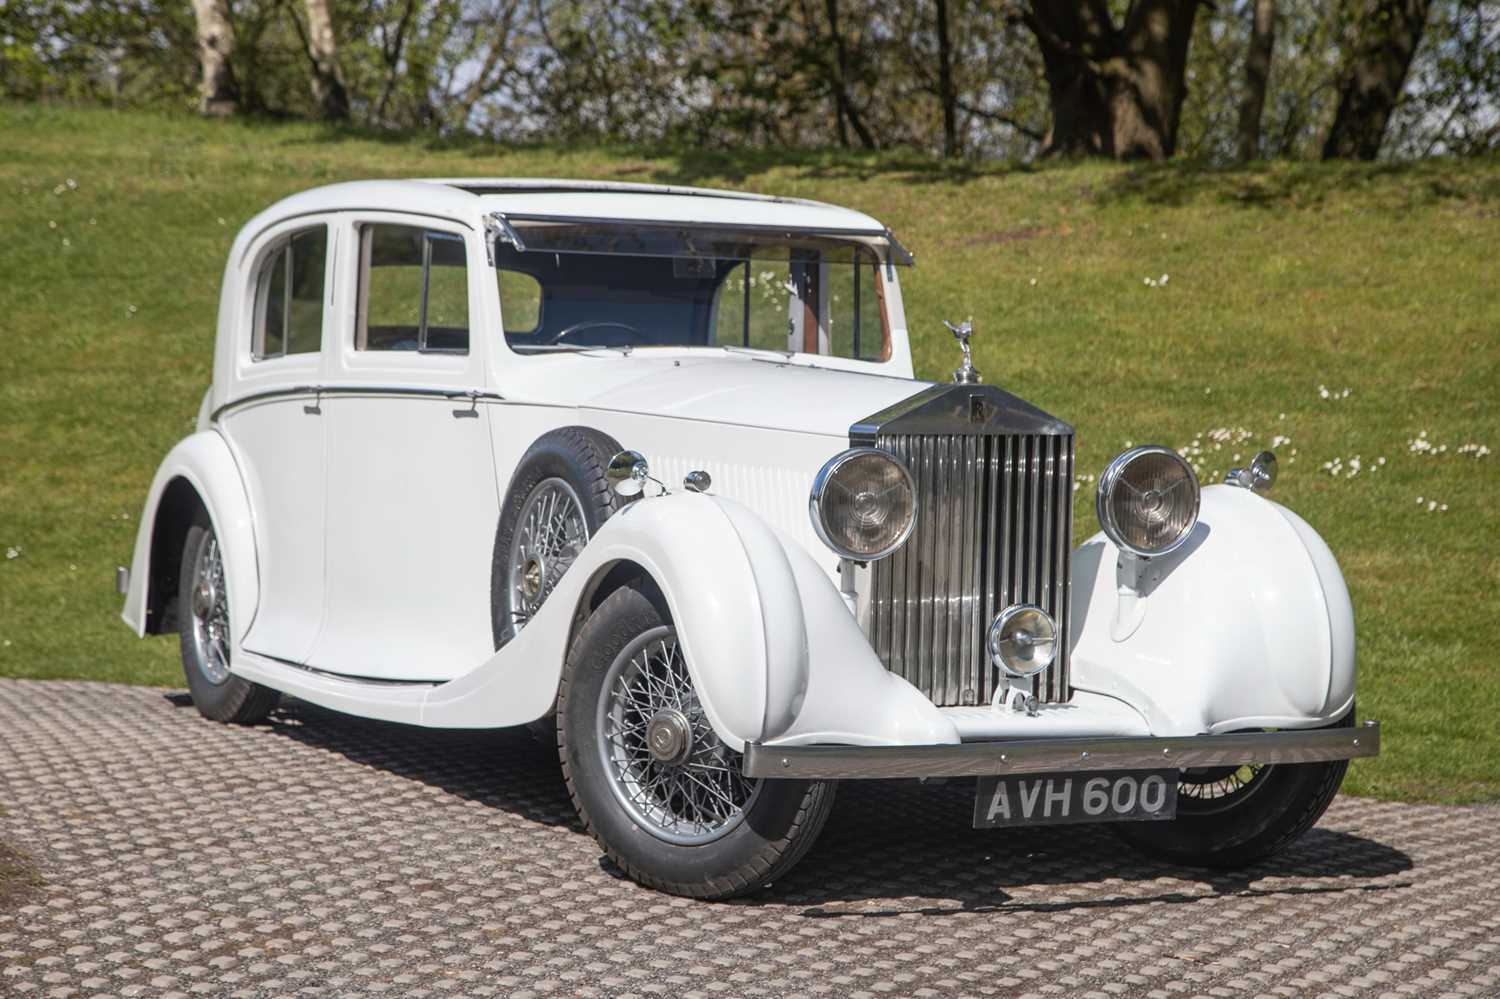 RollsRoyce 2025 1933 Limousine by Barker  Cars For Sale  P  A Wood